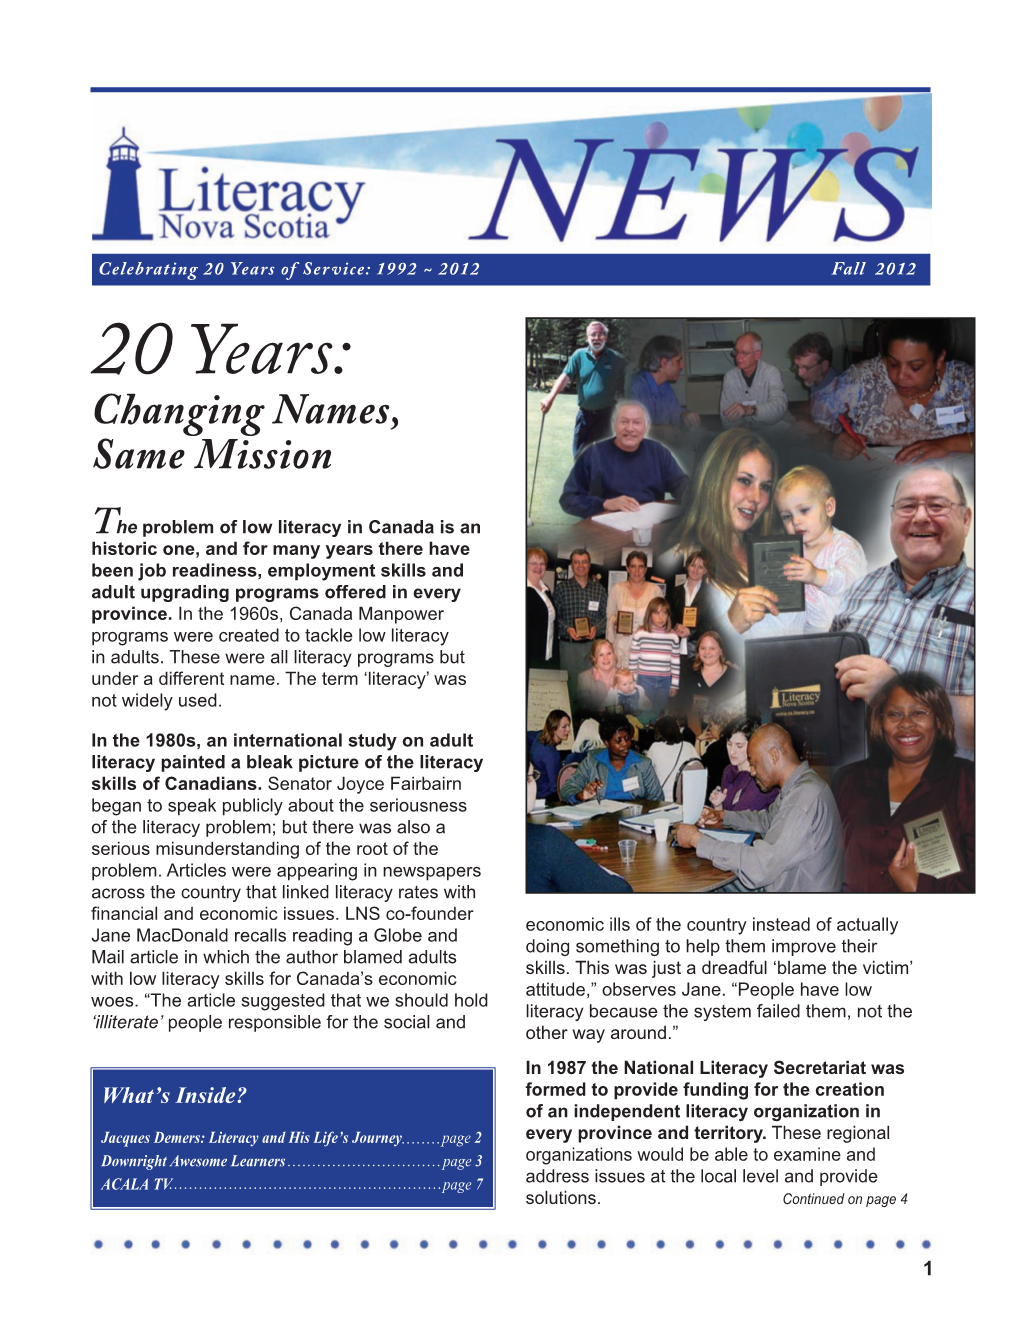 Jacques Demers: Literacy and His Life’S Journey Page 2 Every Province and Territory